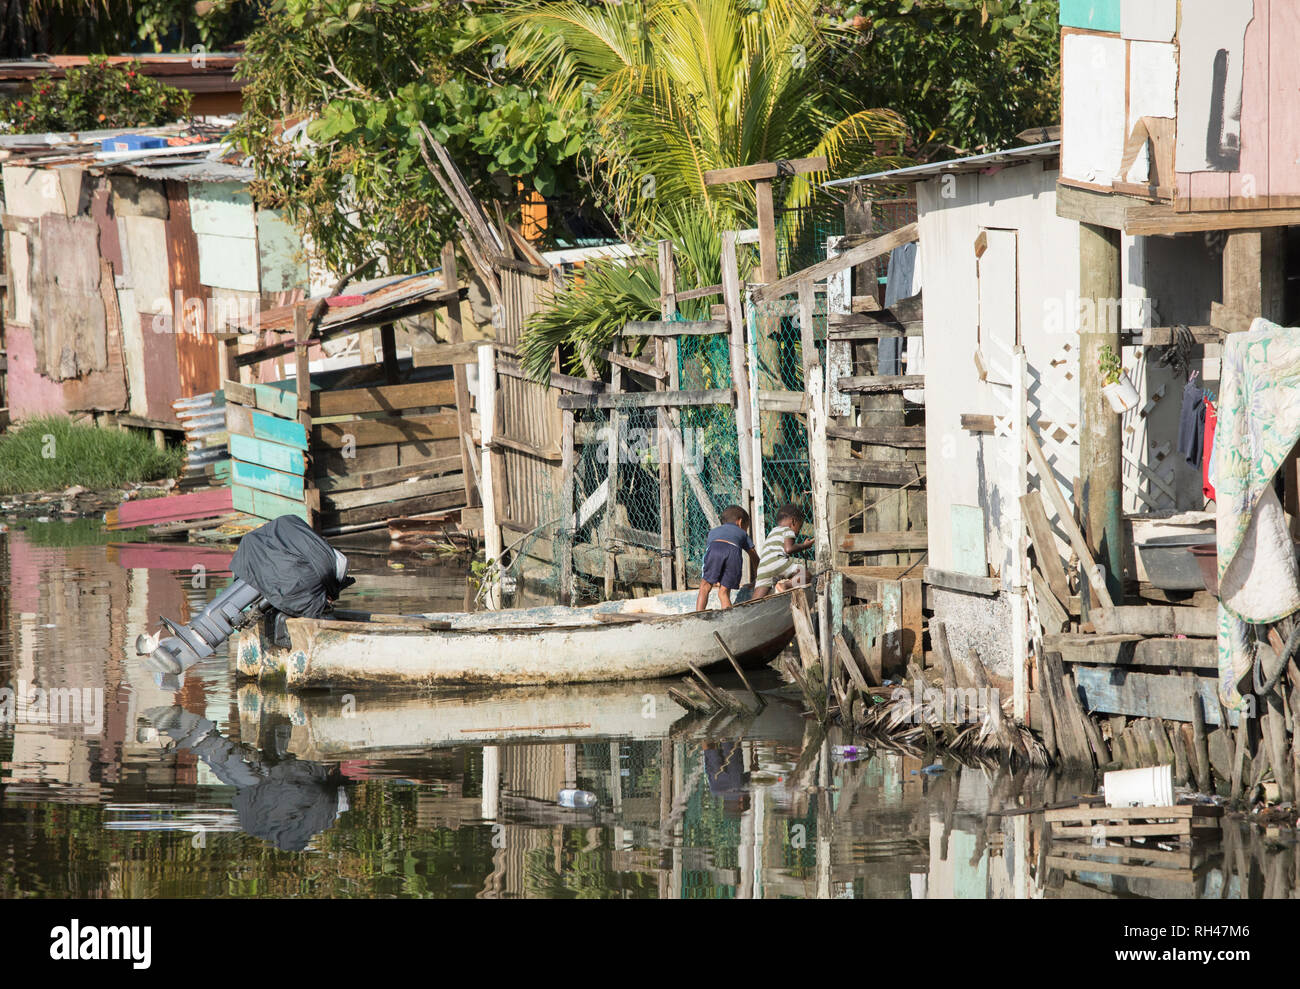 Kids play on a boat in a slum along the water in Honduras. Stock Photo